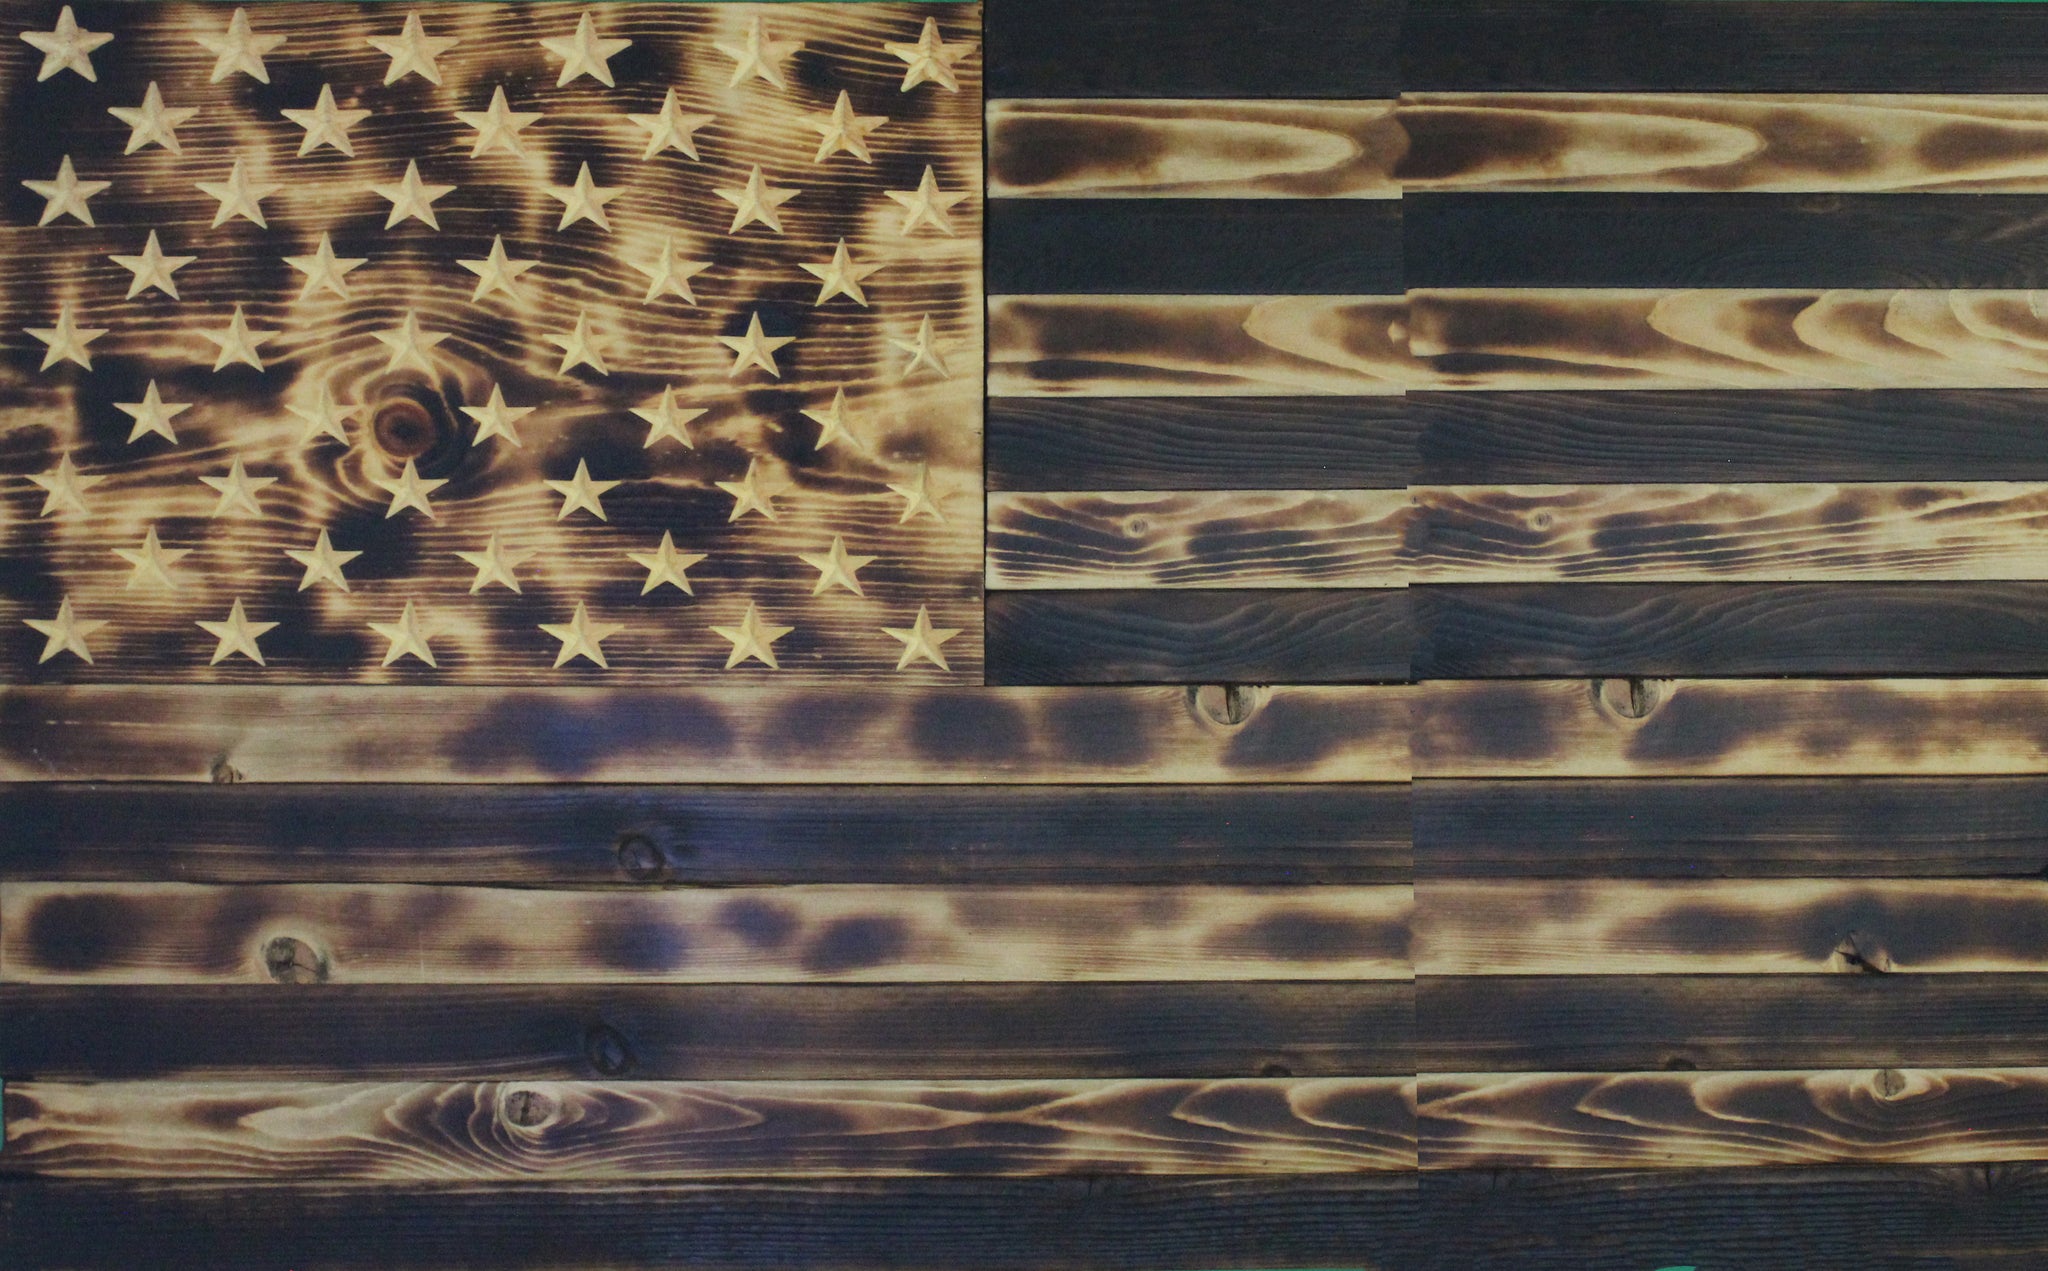 Black and White/Rustic American Flag Wall Piece